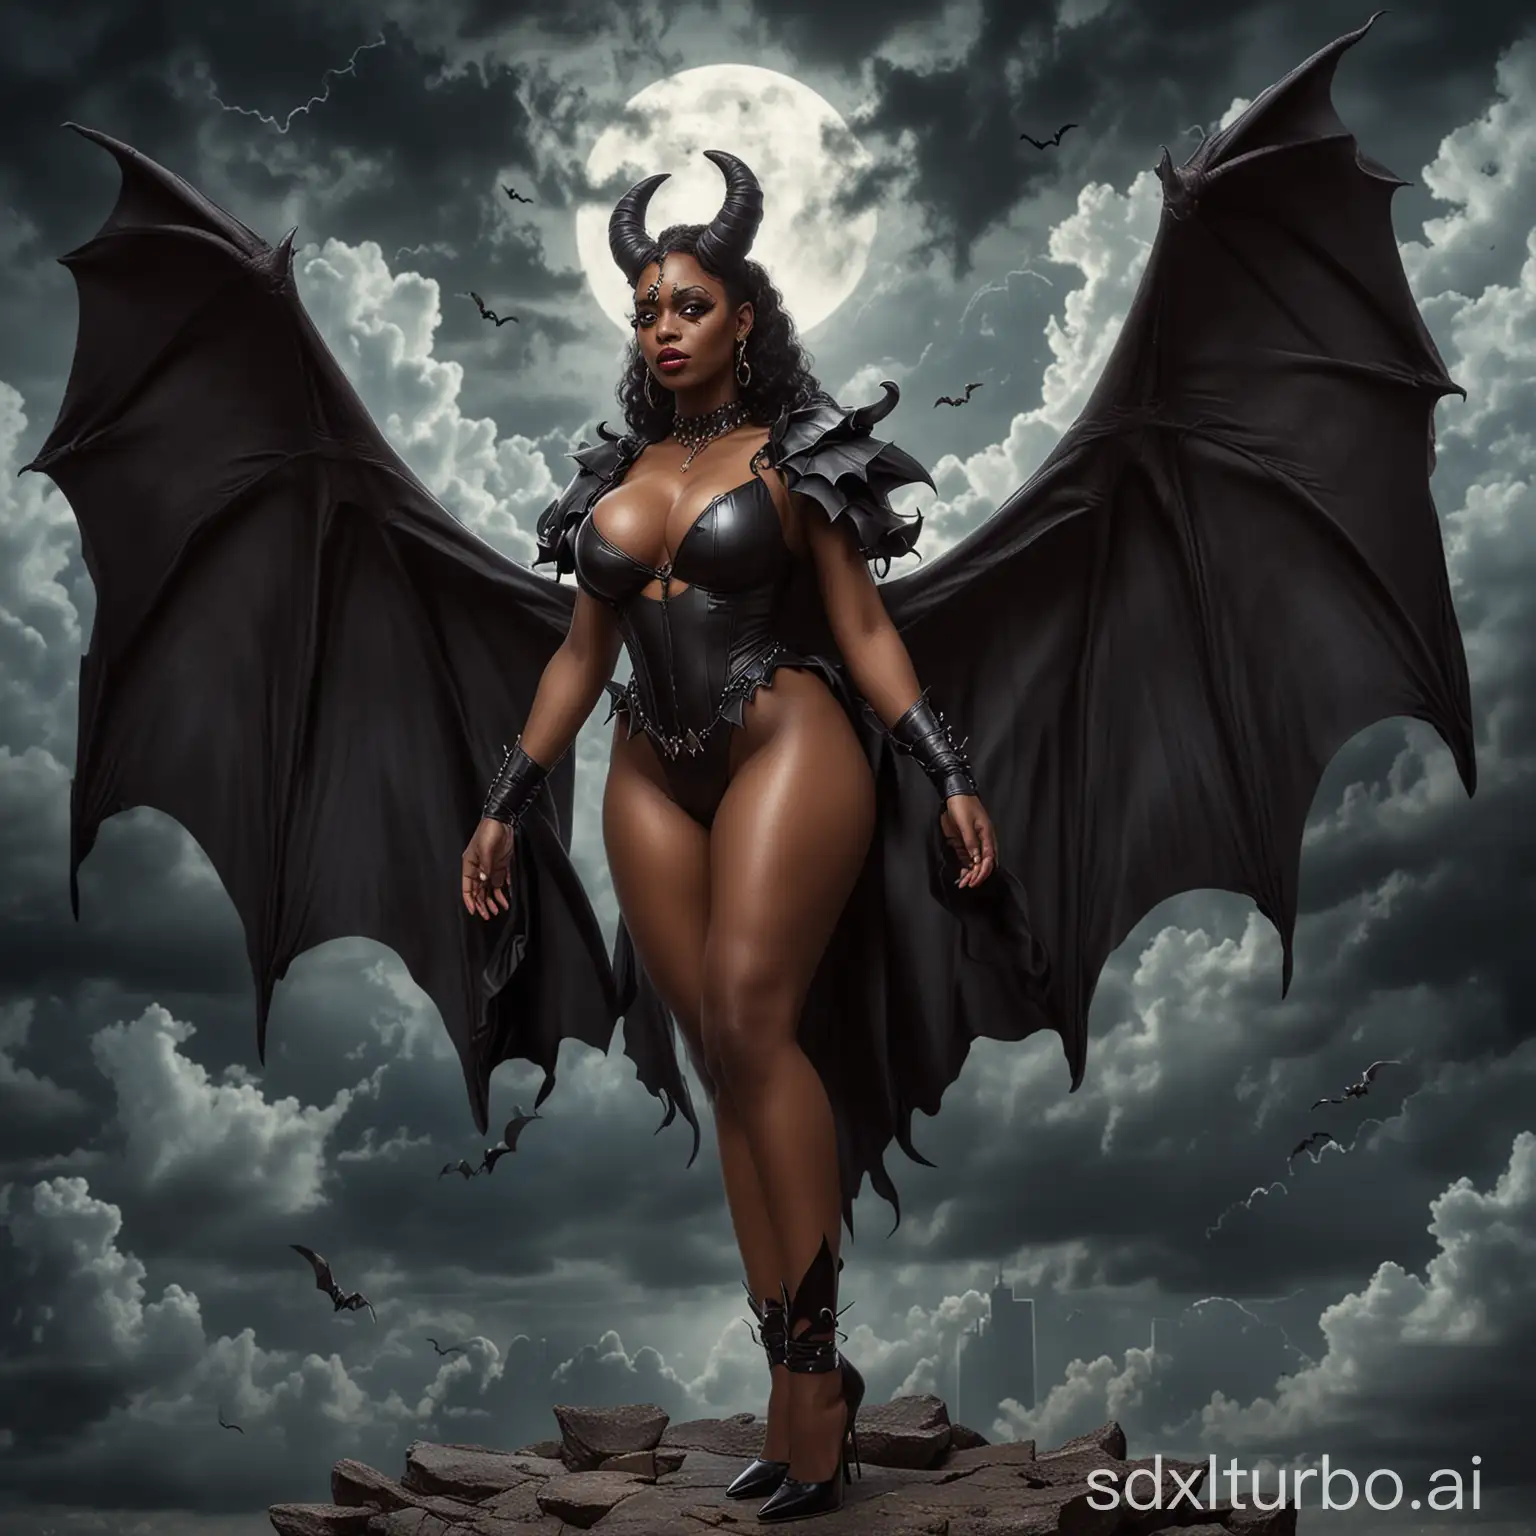 a black woman with big breasts with horns. bat wings  wears high heels  located a place with dark clouds